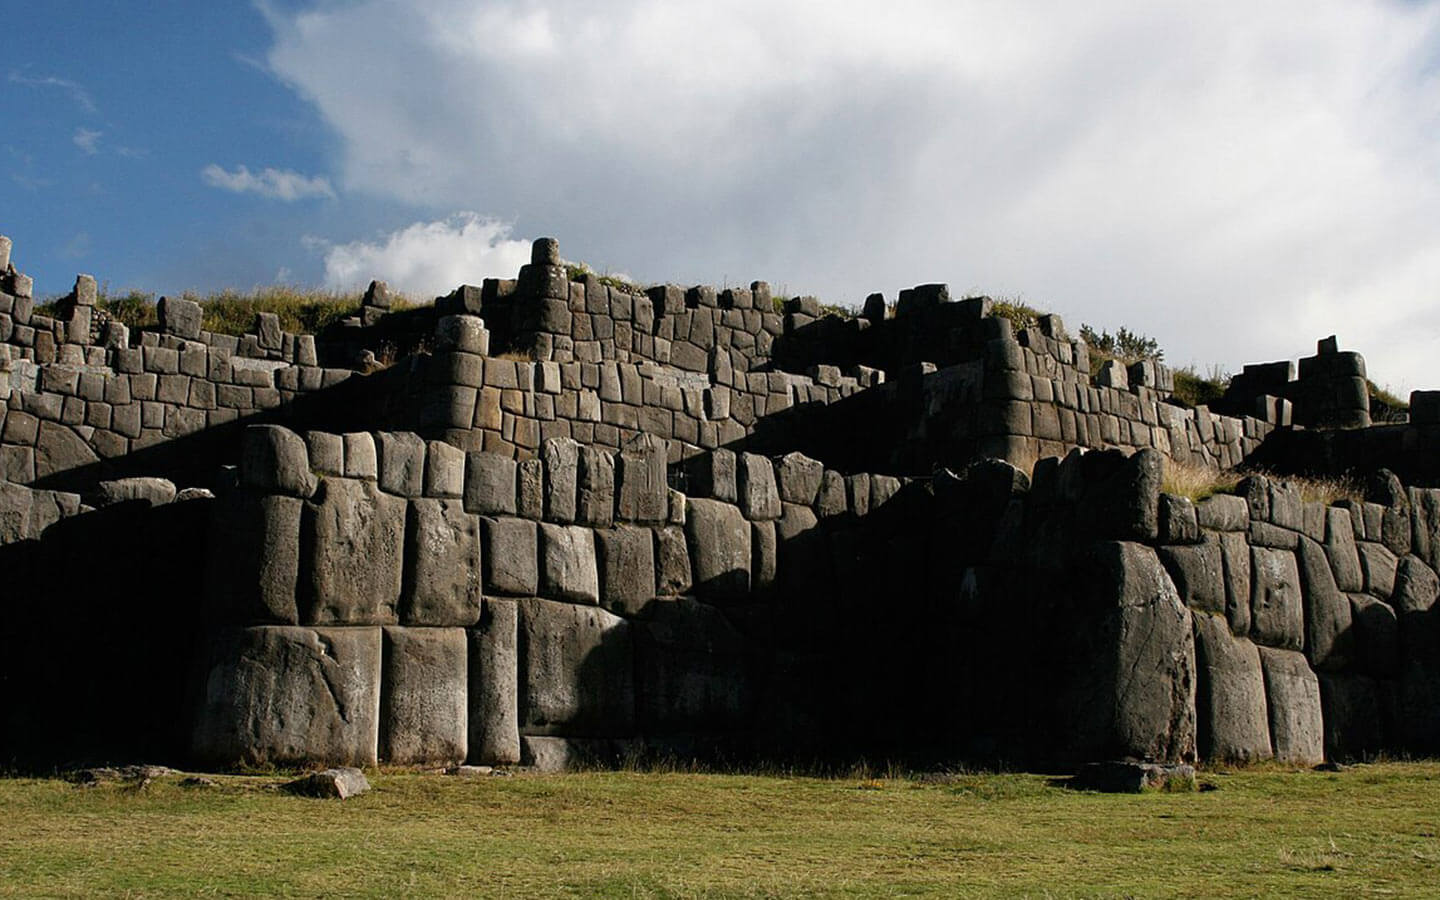 Sacsayhuamán: Architectural Insights into the Inca Civilization